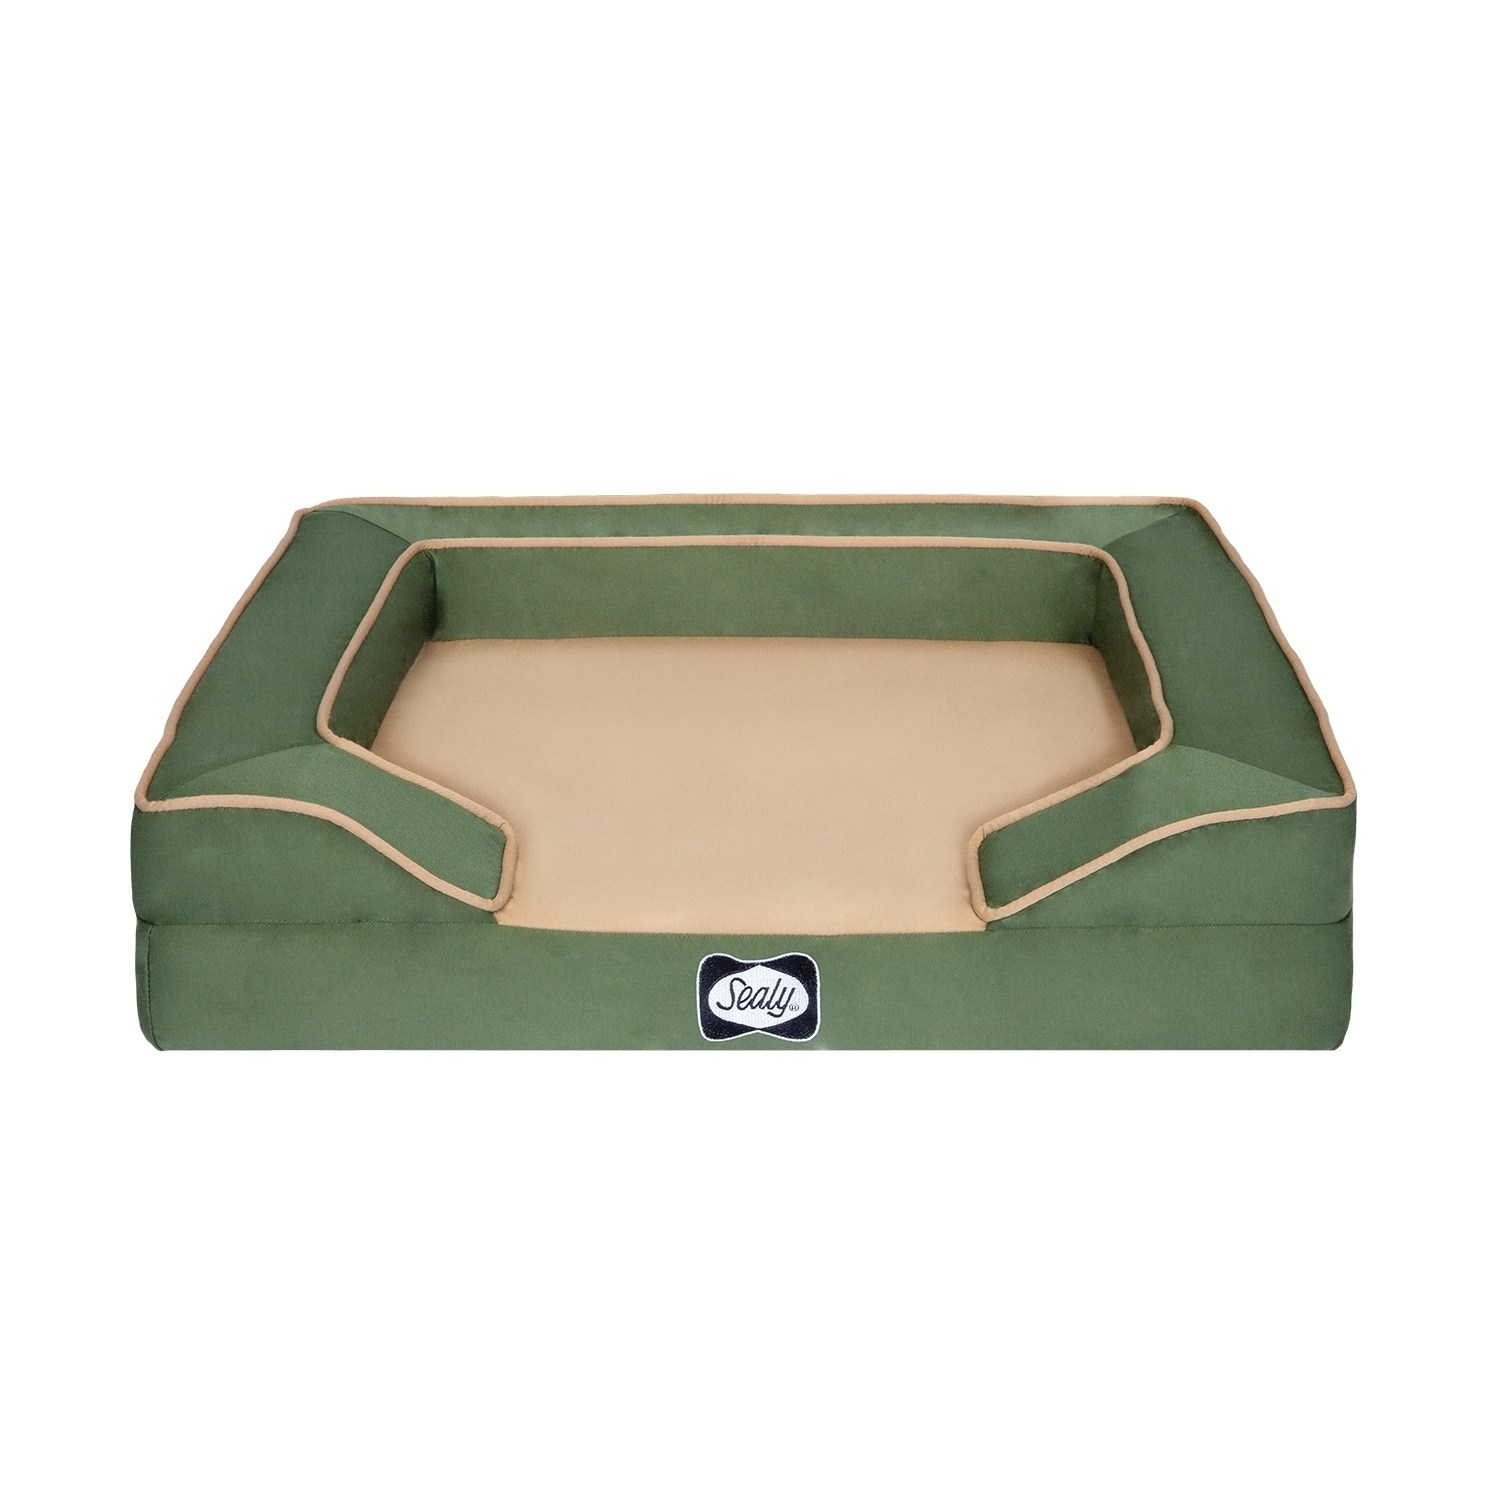 Sealy Lux Elite Quad Element Orthopedic and Memory Foam Dog Bed - image 2 of 4